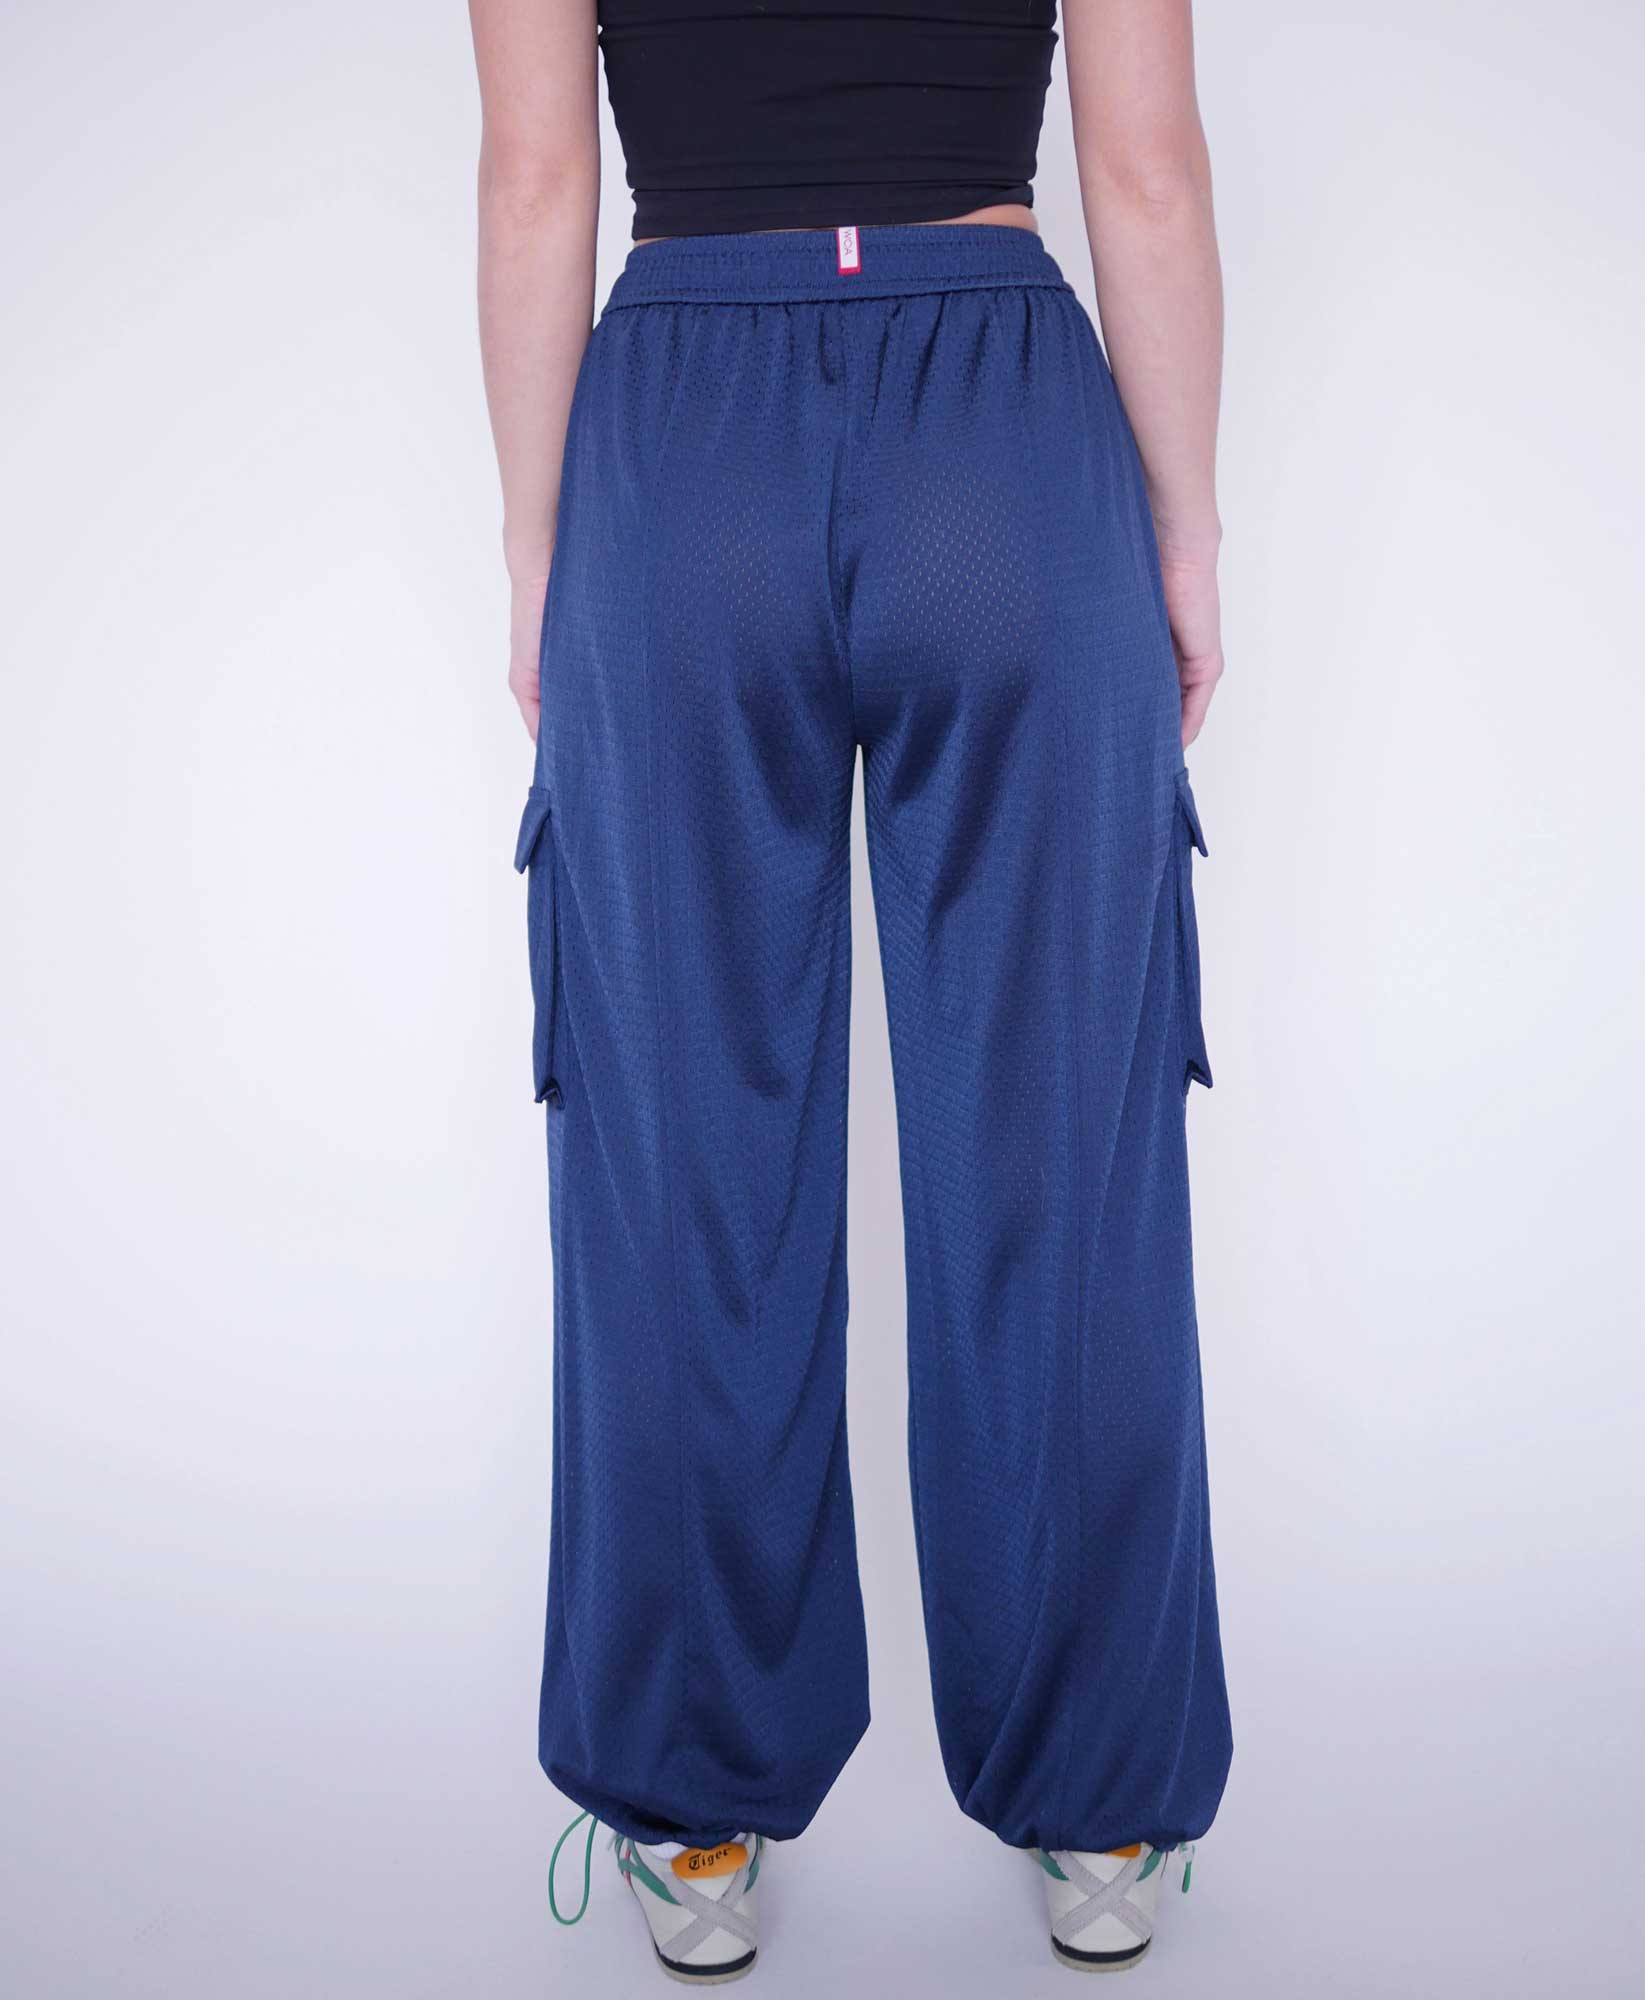 Wear One's At Arena Pant in Classic Navy on Model Full Back View